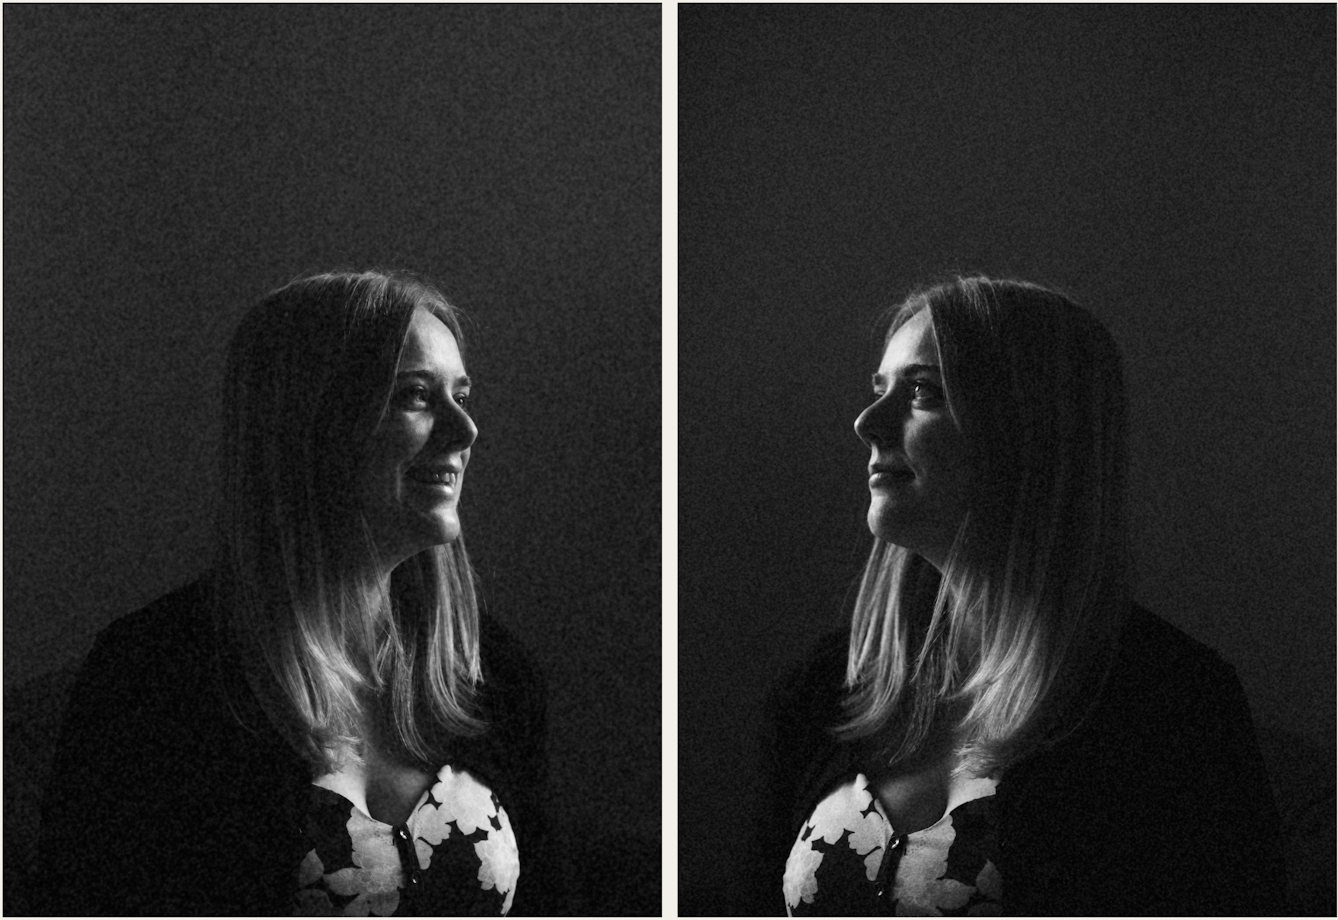 Photographic black and white diptych. The images both show the same young woman with blond hair, wearing a floral dress. In each image she is pictured in profile, looking towards herself in the other image, as if in a mirror. The image is very dark in tone, with just her profile picked out in the light. In the image on the left the woman is smiling. In the image on the right she has a more neutral expression.